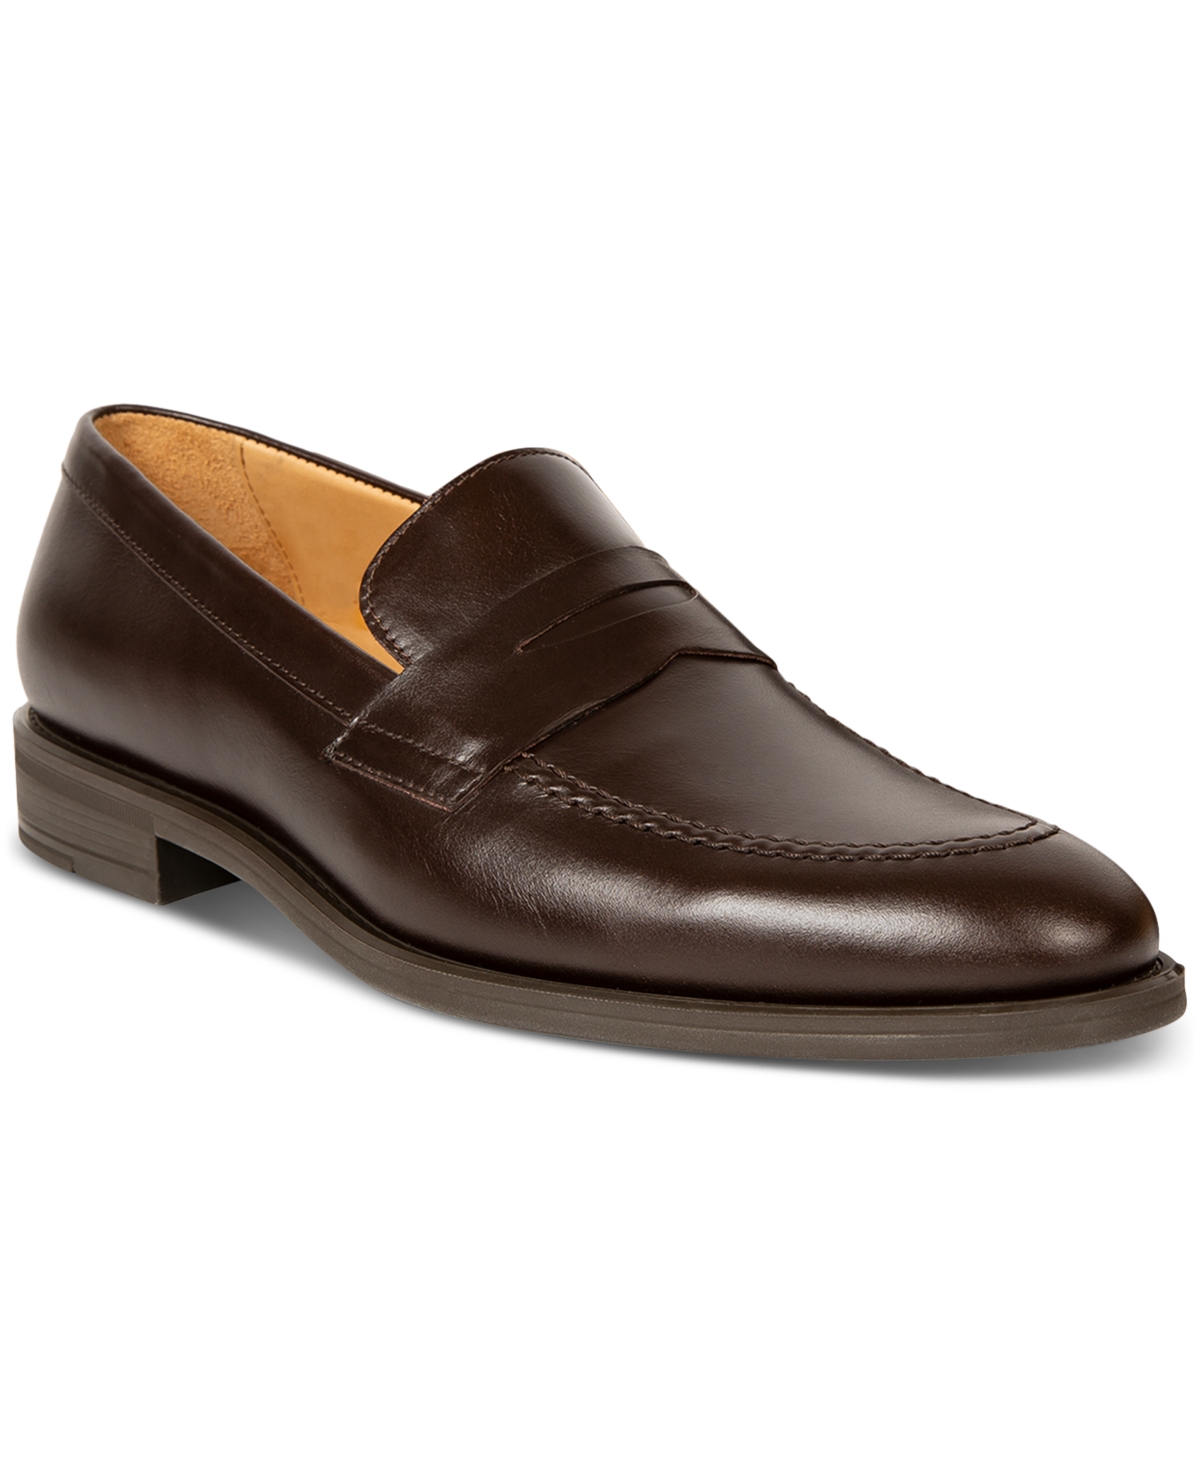 Paul Smith Men's Remi Leather Dress Casual Loafer In Dark Brown